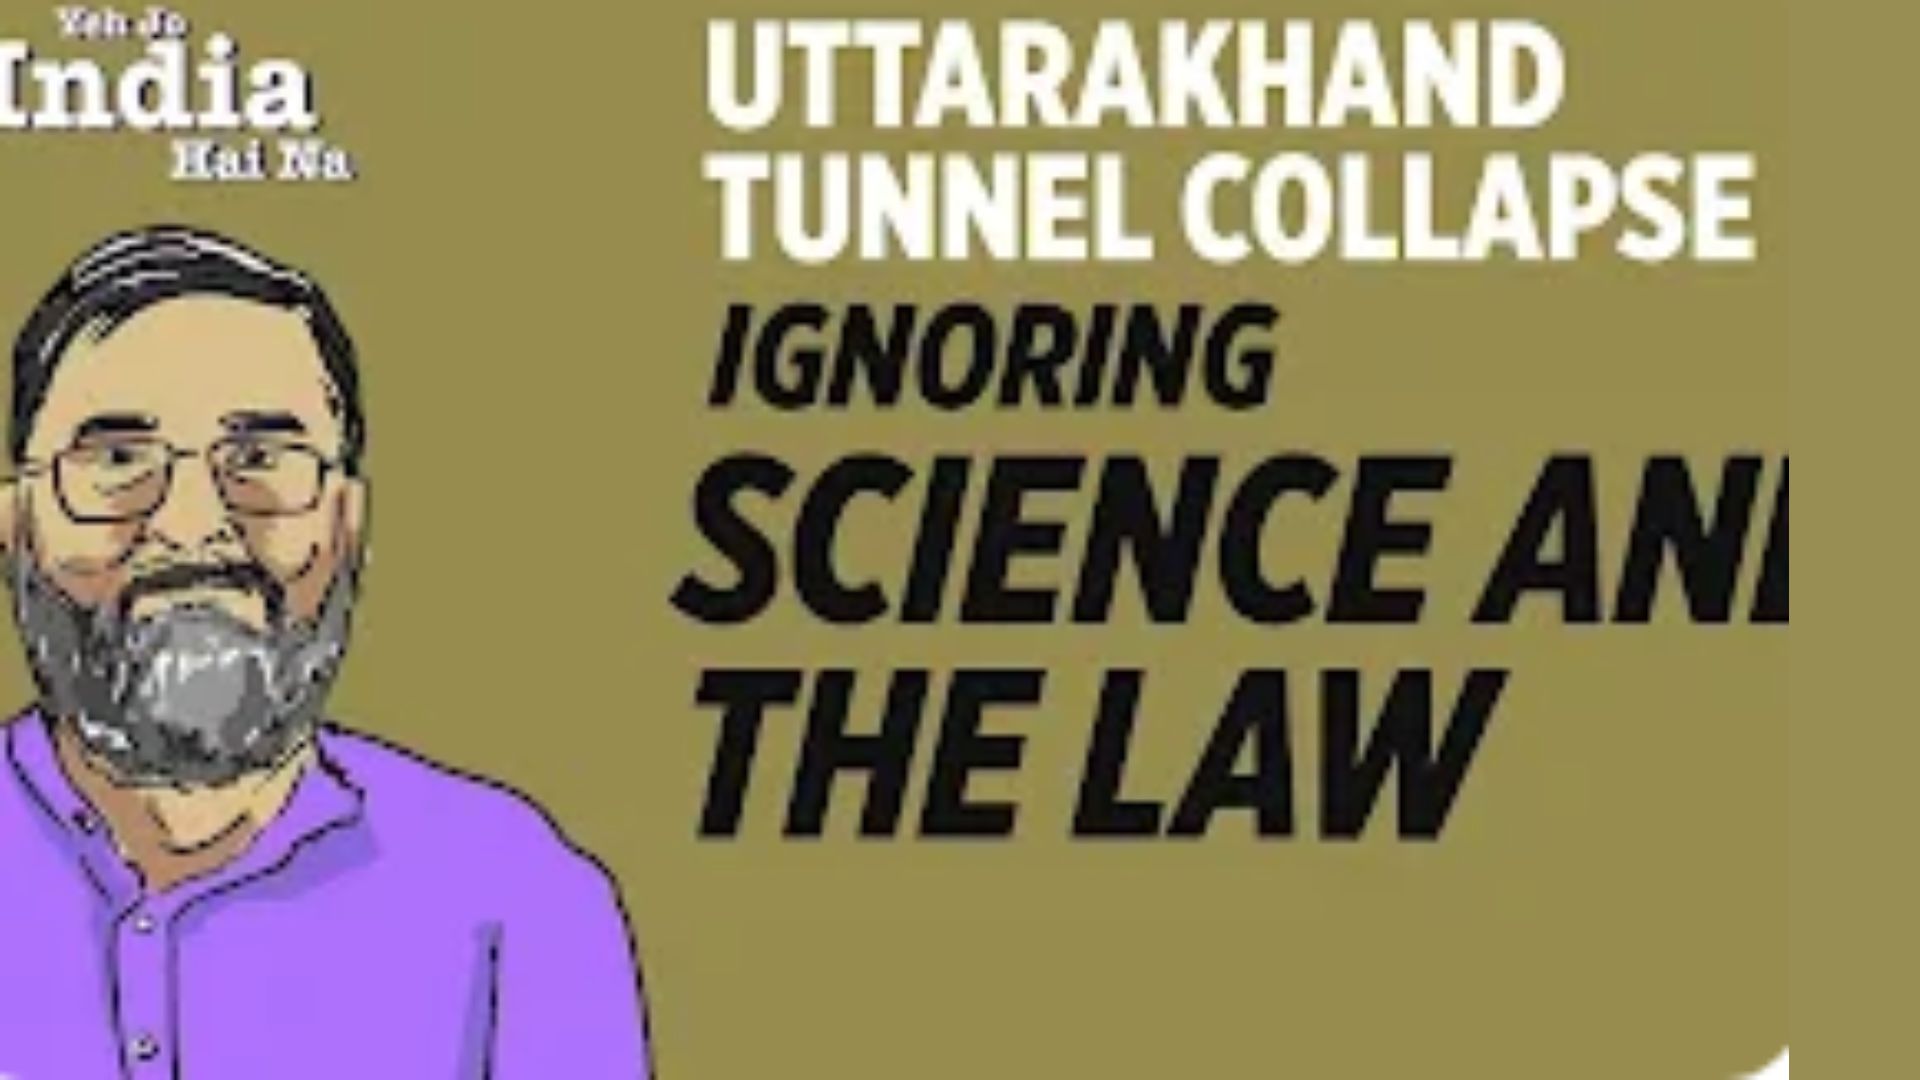 Uttarkashi Tunnel Collapse We Ignored Nature and Science; Evaded Our Own Laws